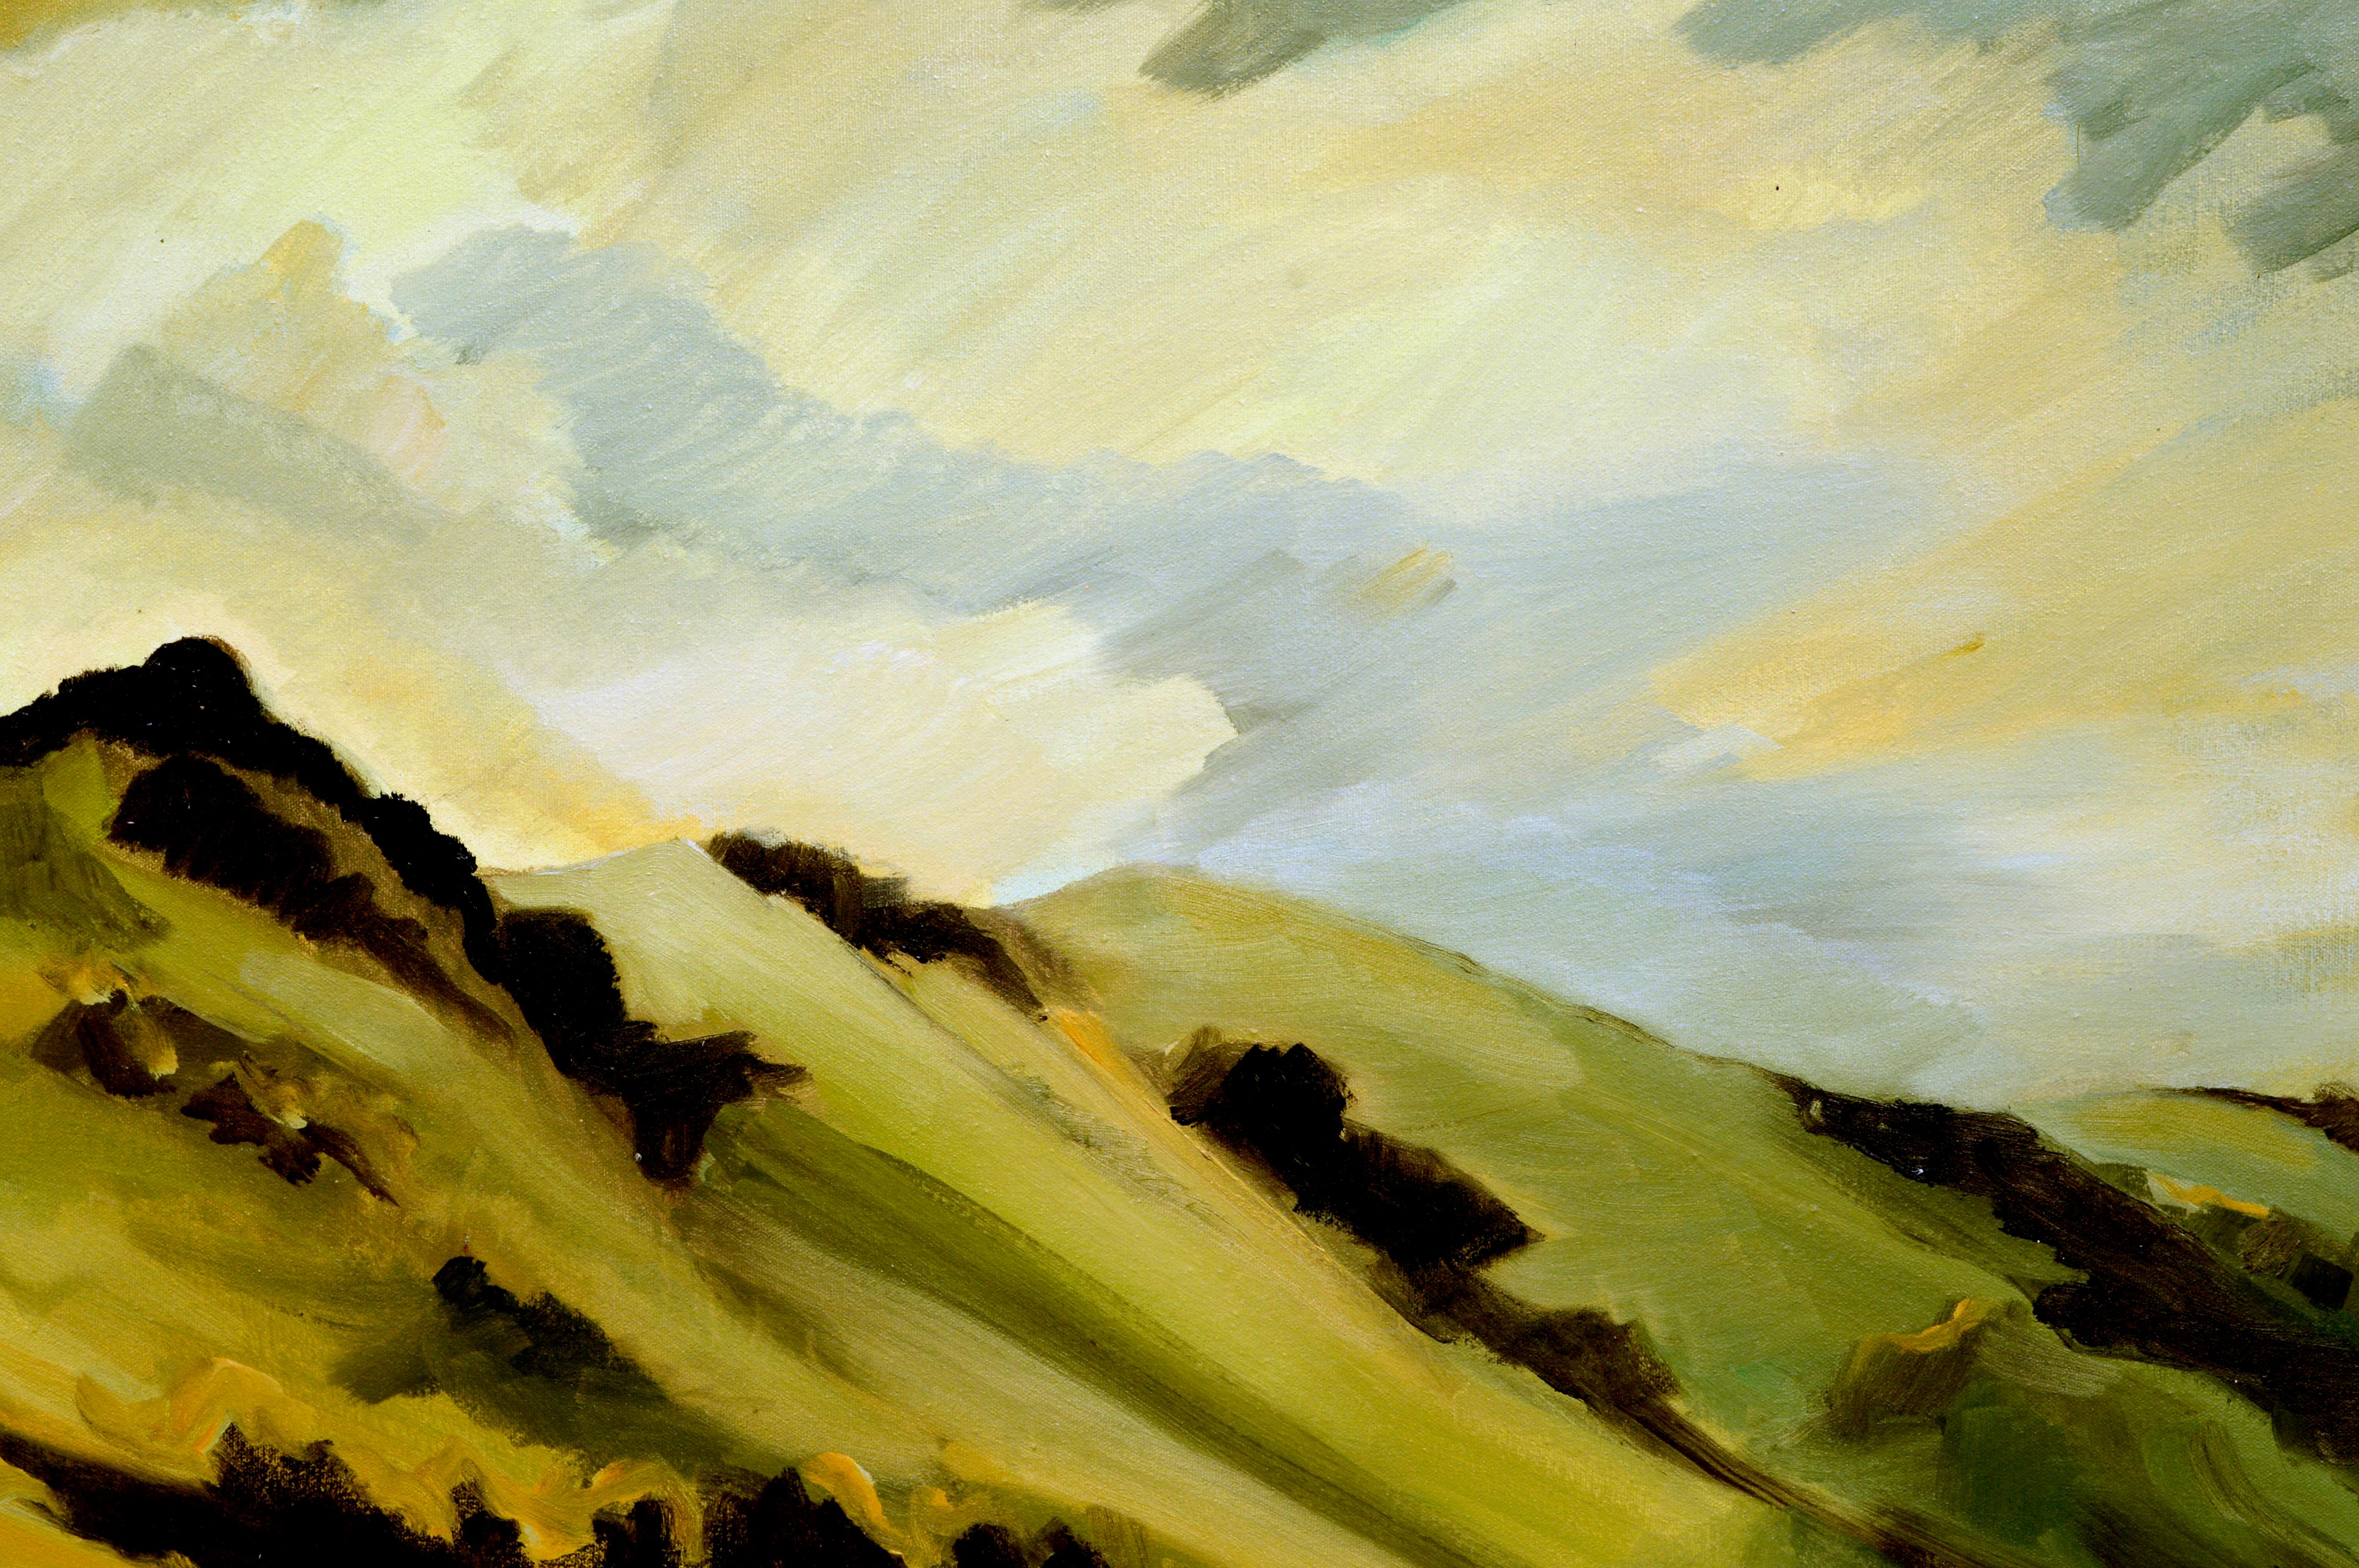 Marin Hills by Noel Howard (American, 20th century) was painted in 1968 while the artist was living in Marin county. This plein aire oil is signed, Noel Howard, in the lower right corner and is presented in a gilt-wood frame. Image, 24”H x 30”W.